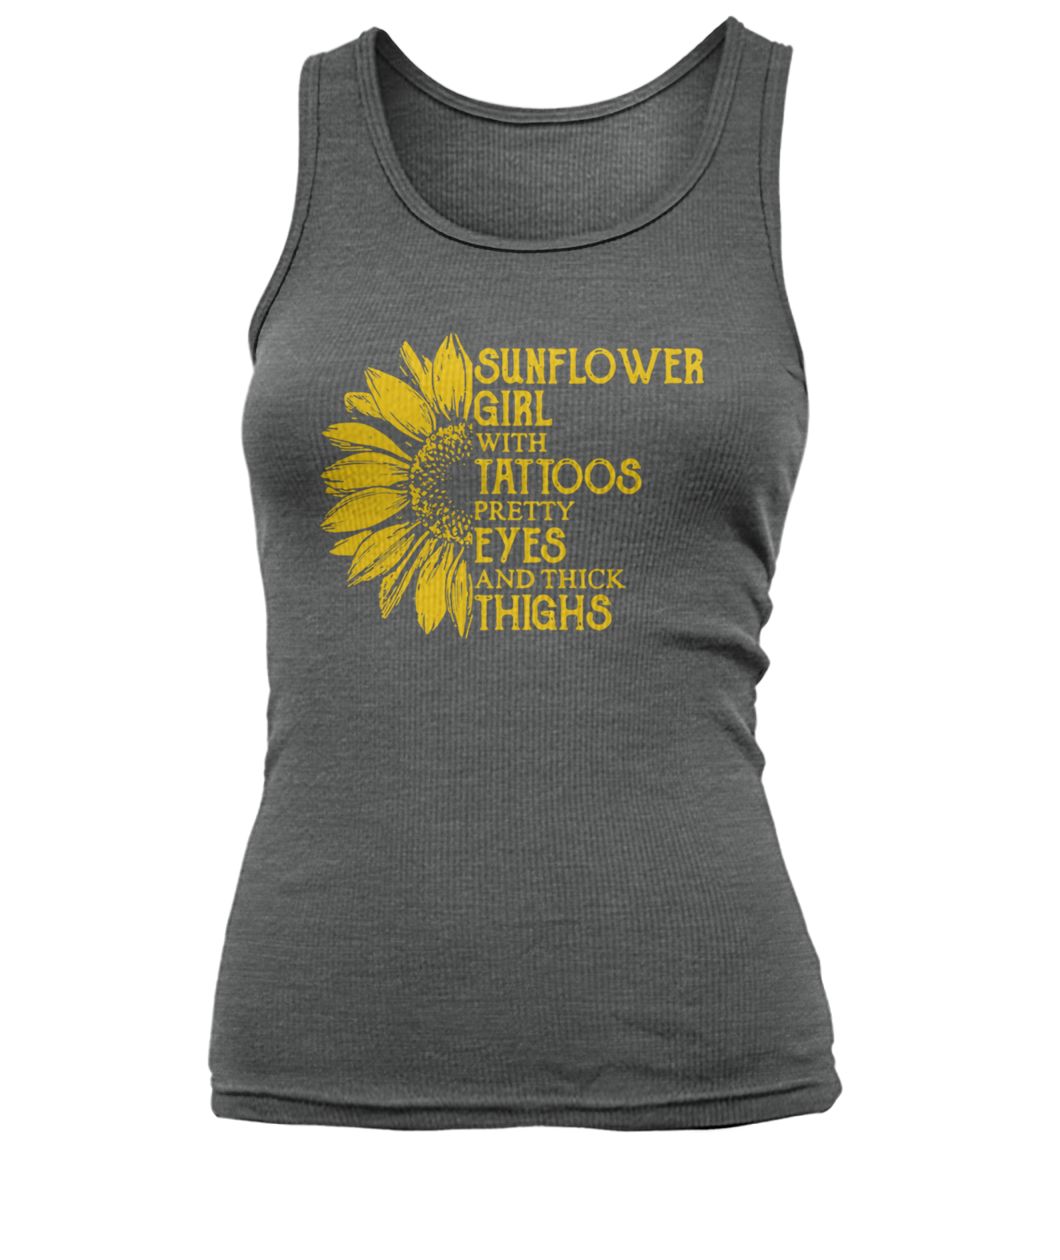 Sunflower girl with tattoos pretty eyes and thick thighs women's tank top